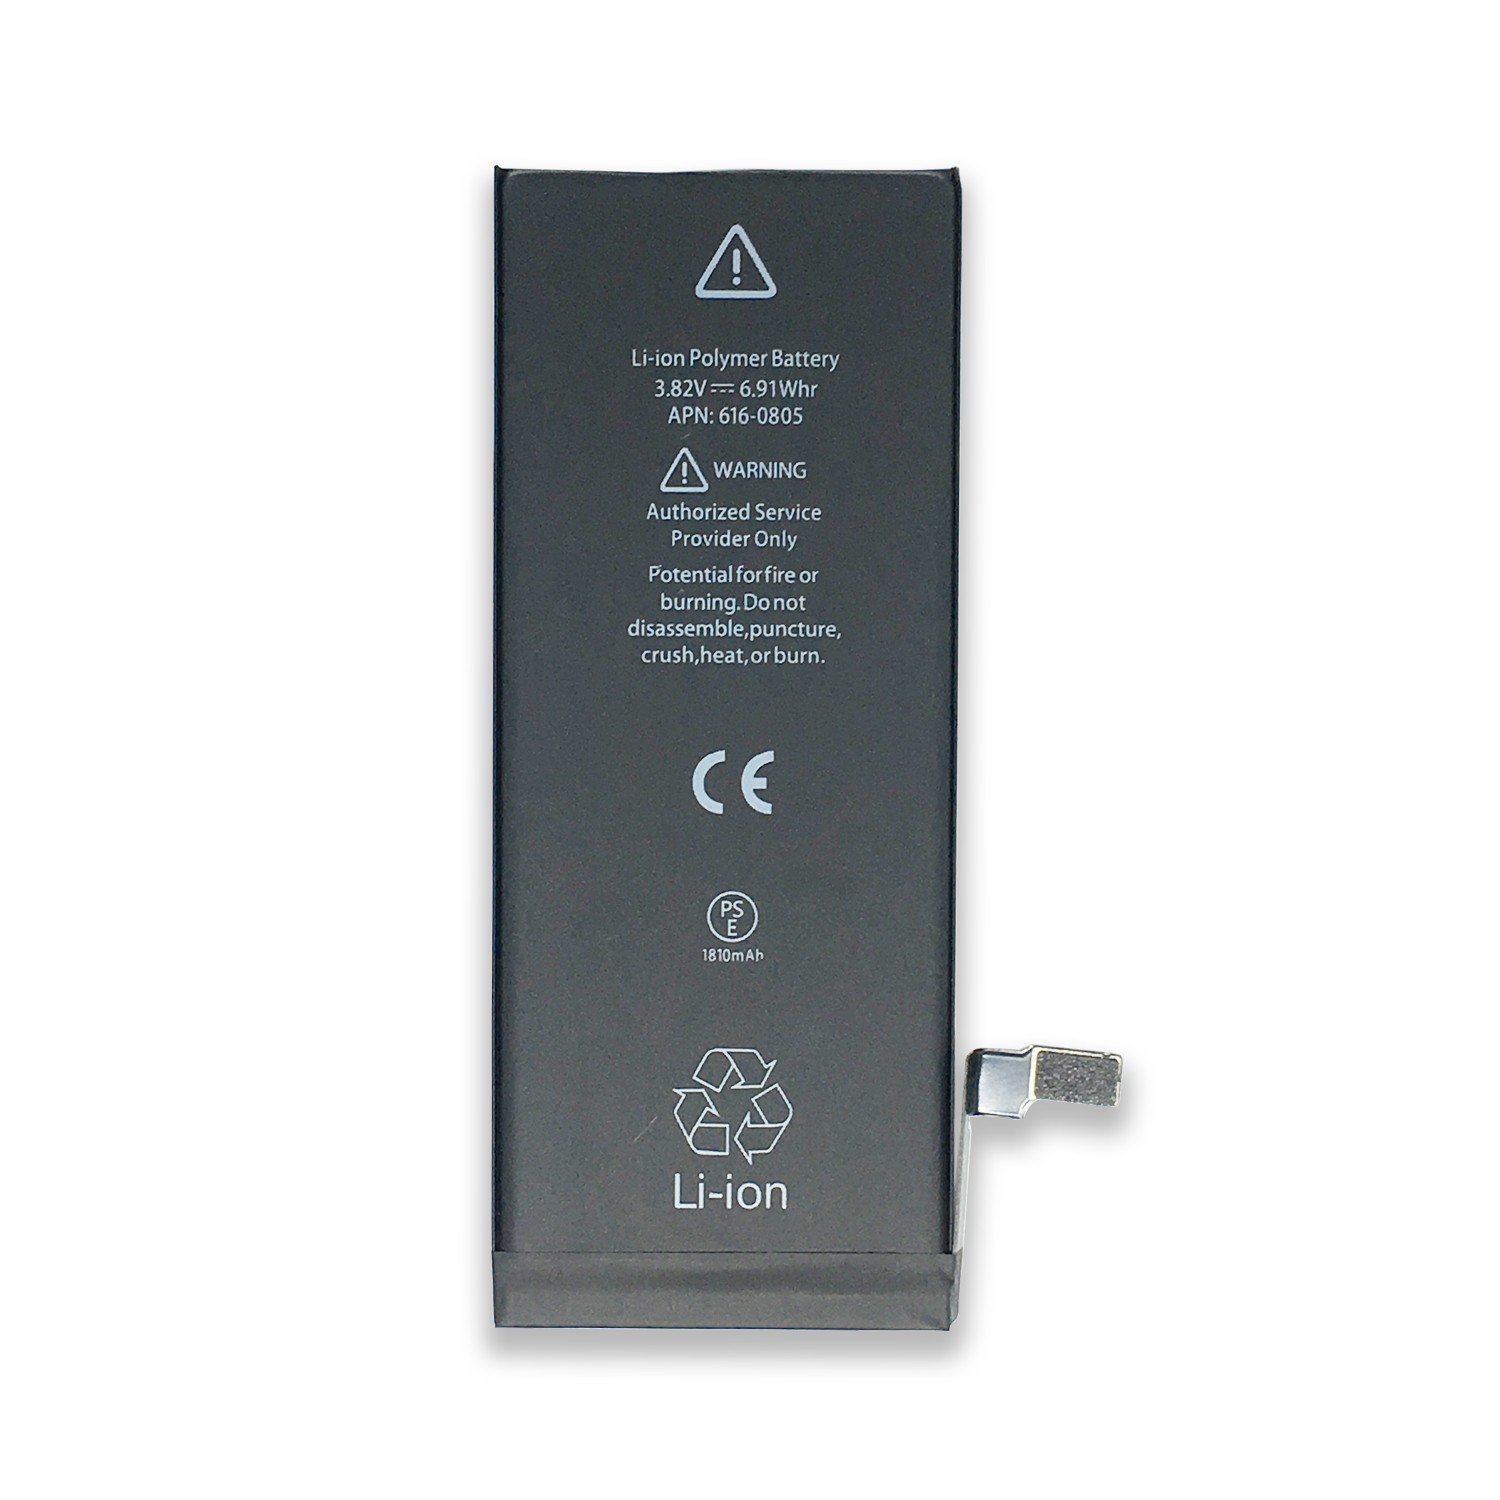 Distributor Wholesale iPhone 6 Replacement Phone Battery with high quality